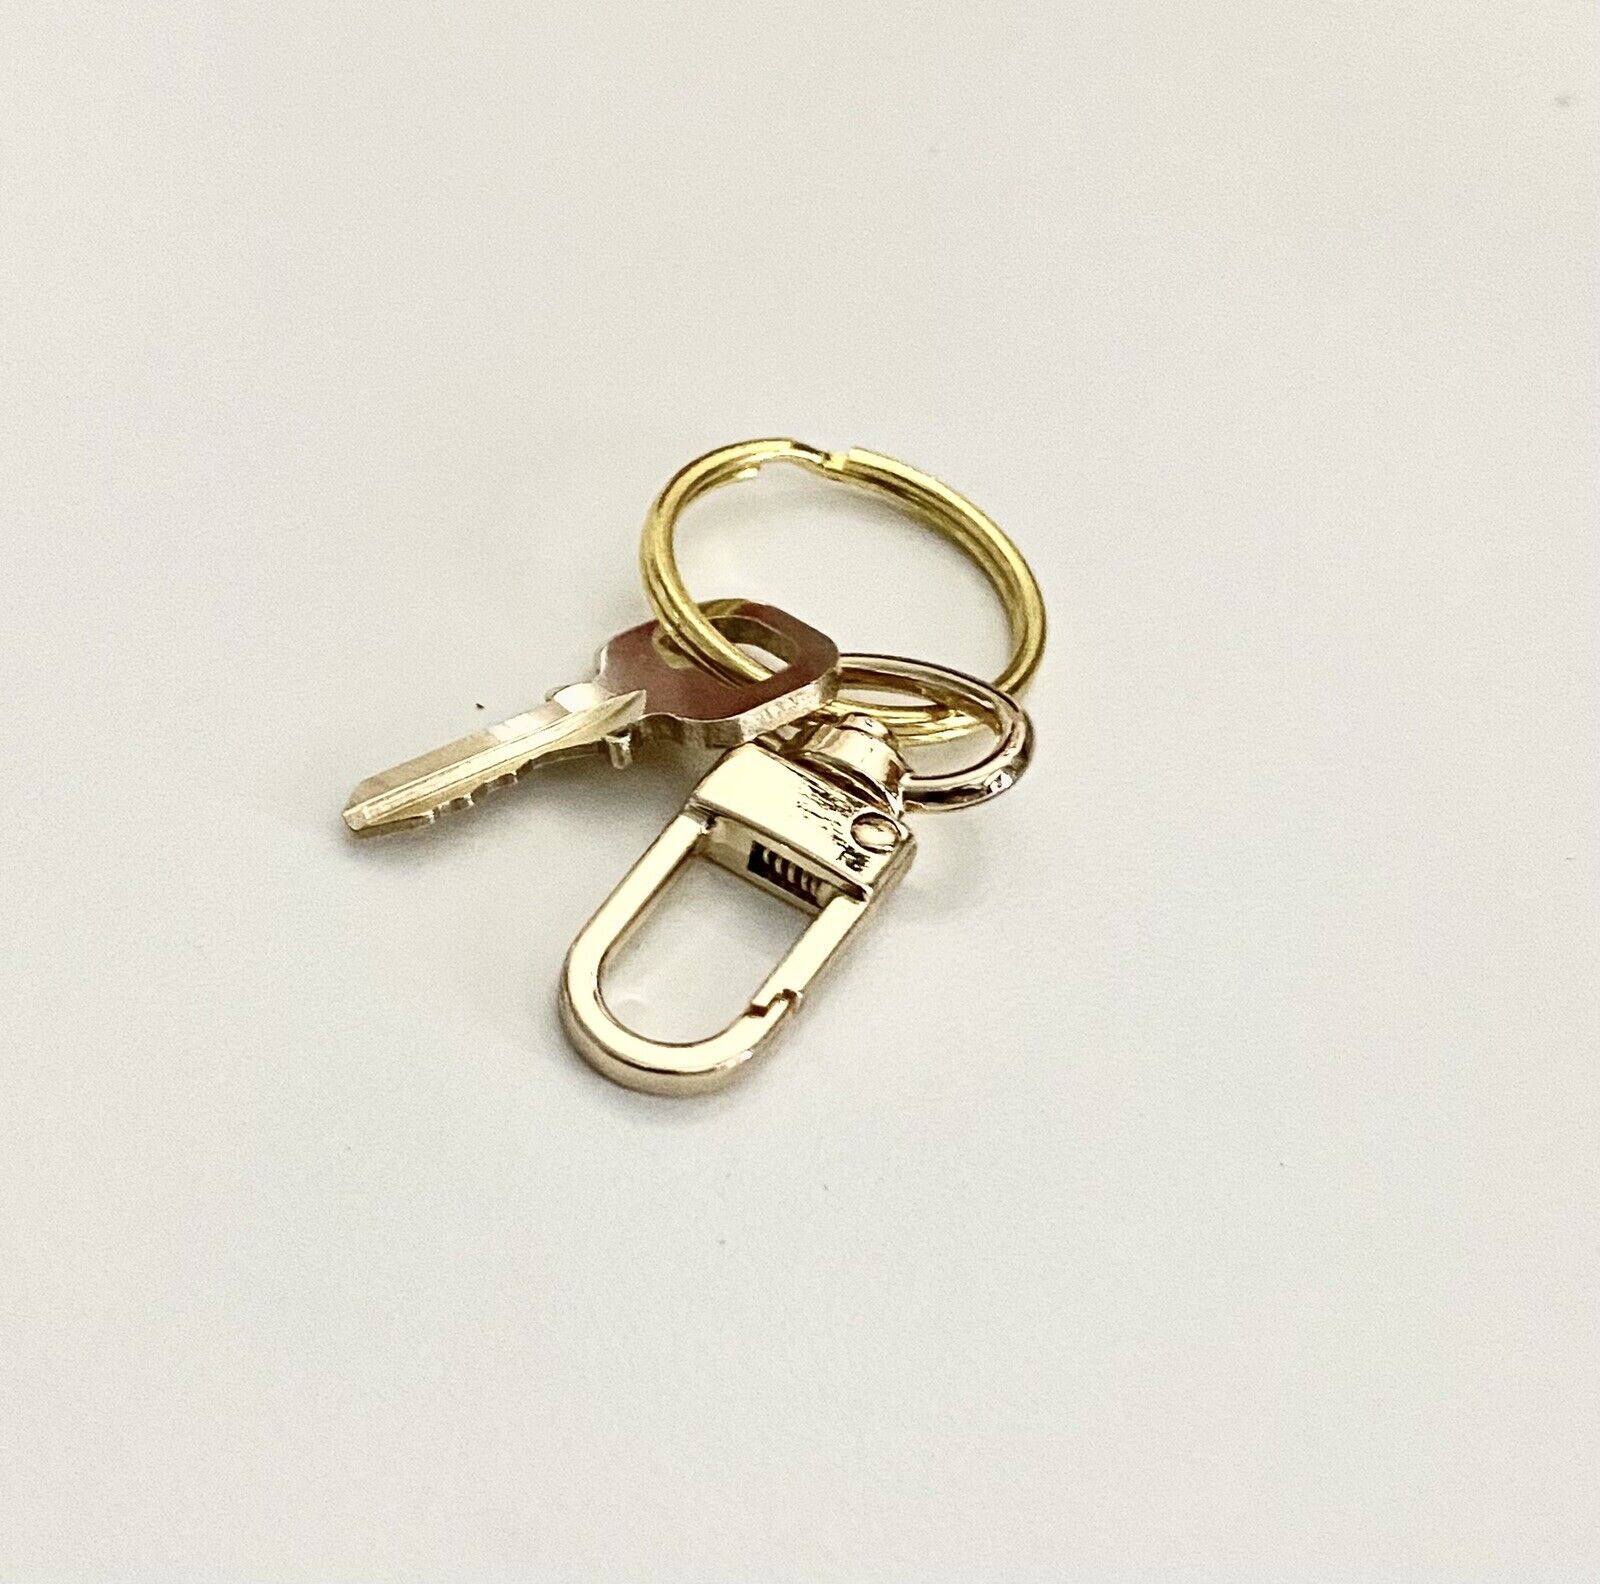 Louis Vuitton Key #315 Brass Goldtone For Genuine LV Lock Only